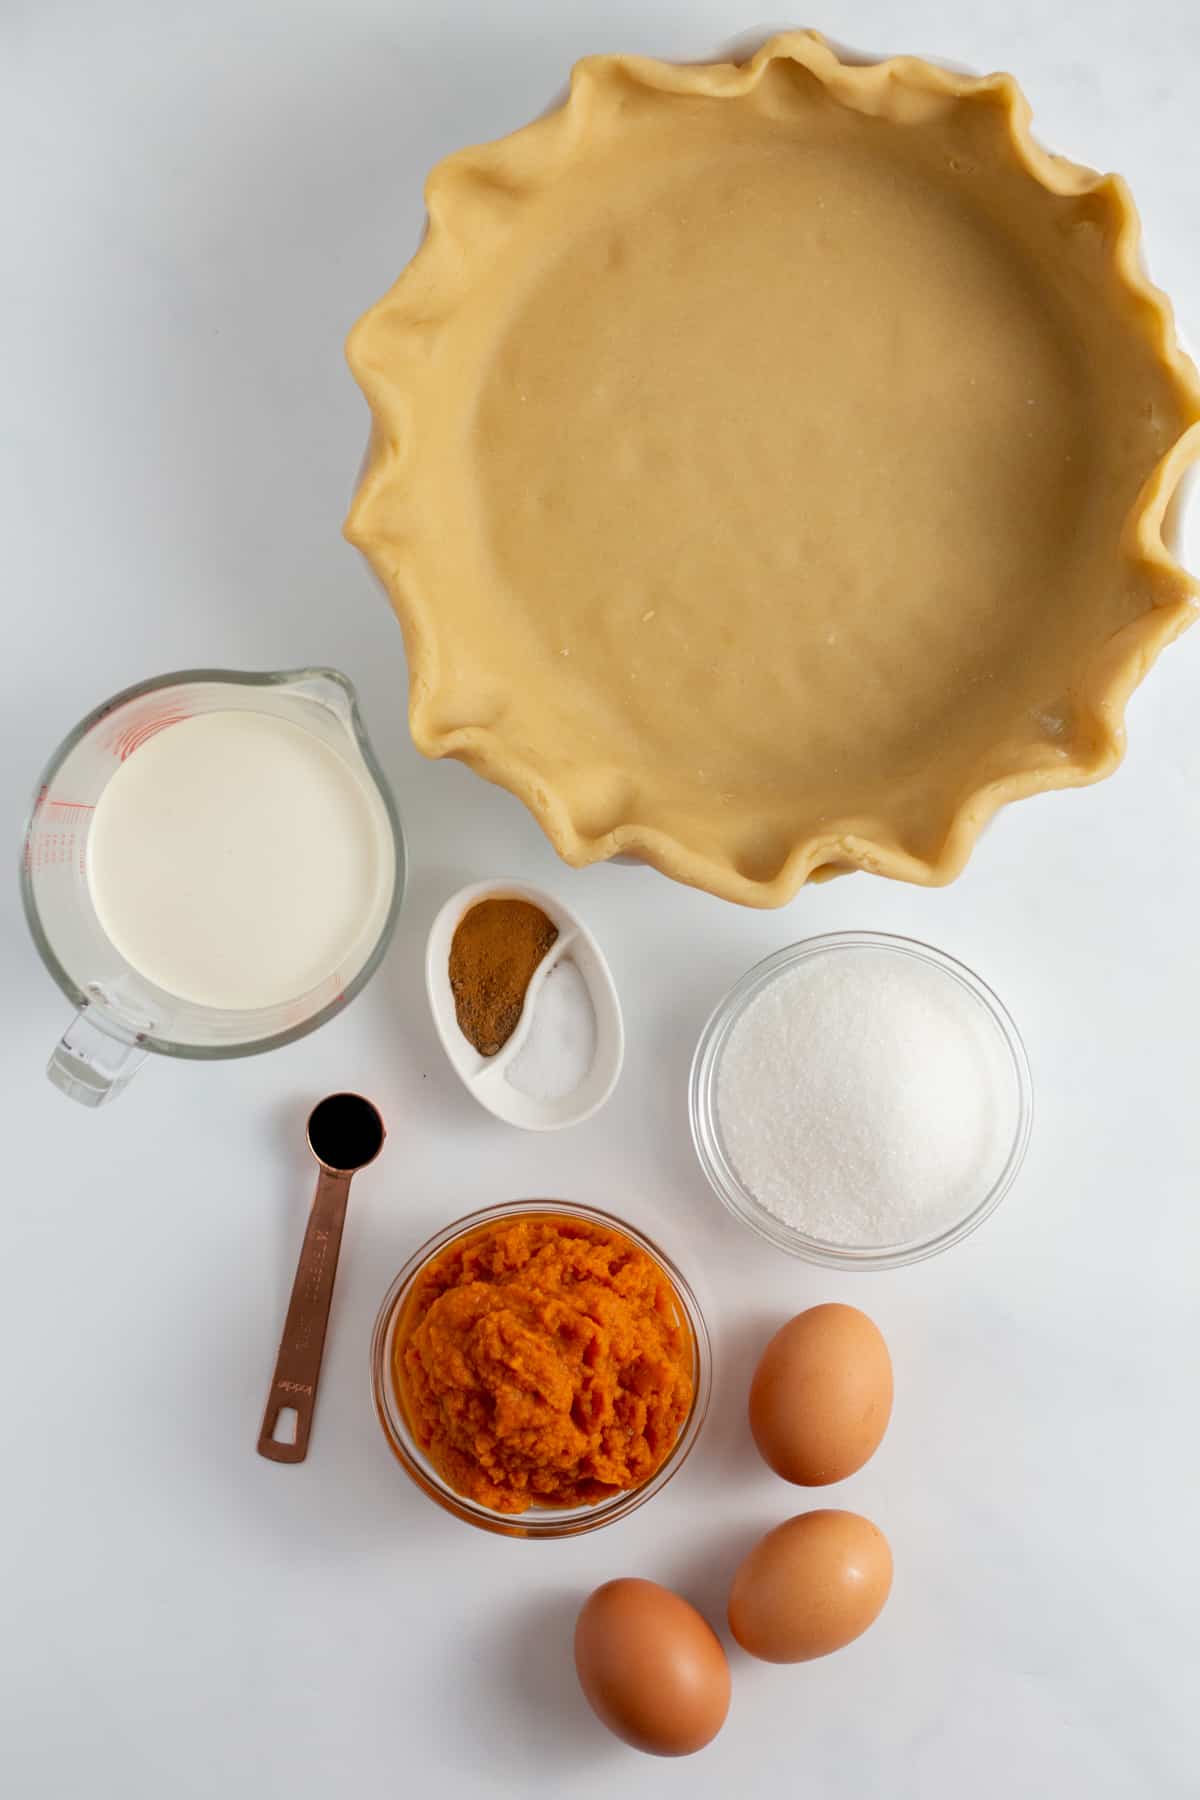 ingredients to make homemade pumpkin pie with a homemade crust